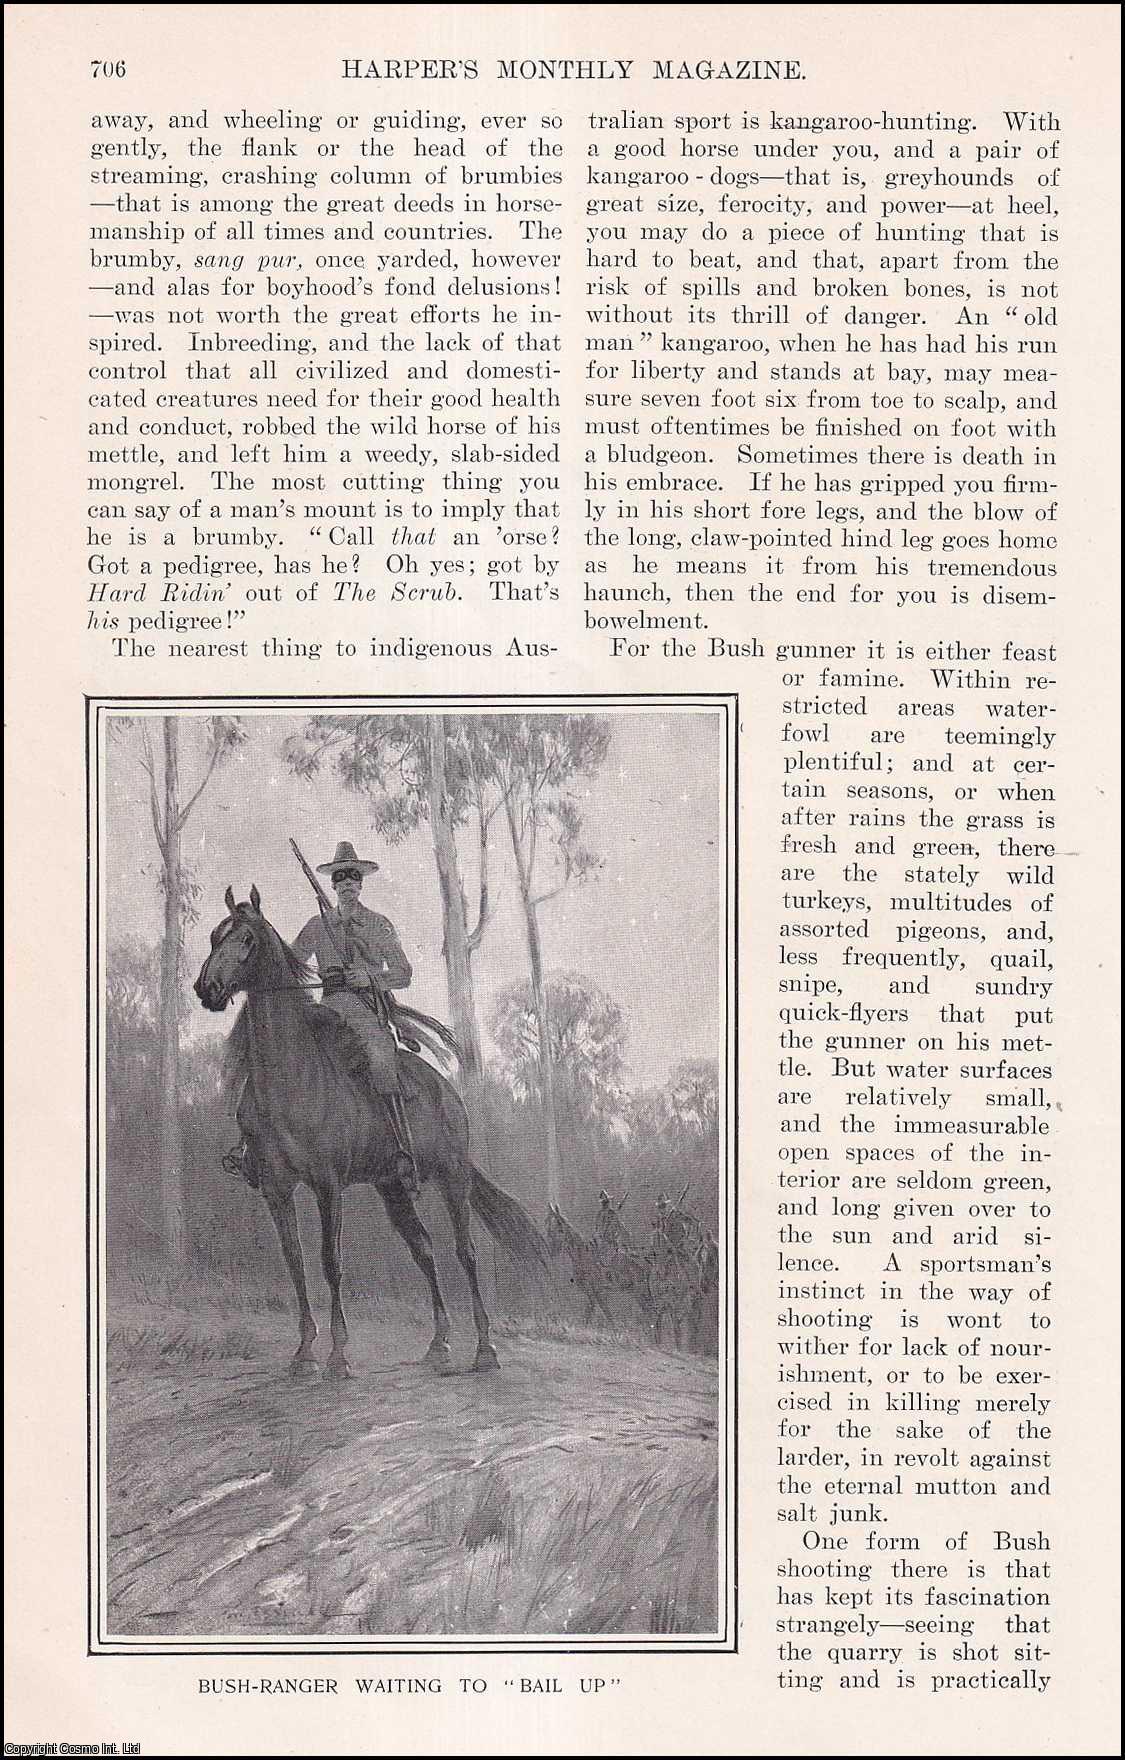 AUSTRALIAN SQUATTER -  The Australian Squatter : a squatter was a settler who occupied a large tract of Aboriginal land in order to graze livestock. By H.C. MacIlvaine. An original article from the Harper's Monthly Magazine, 1901.